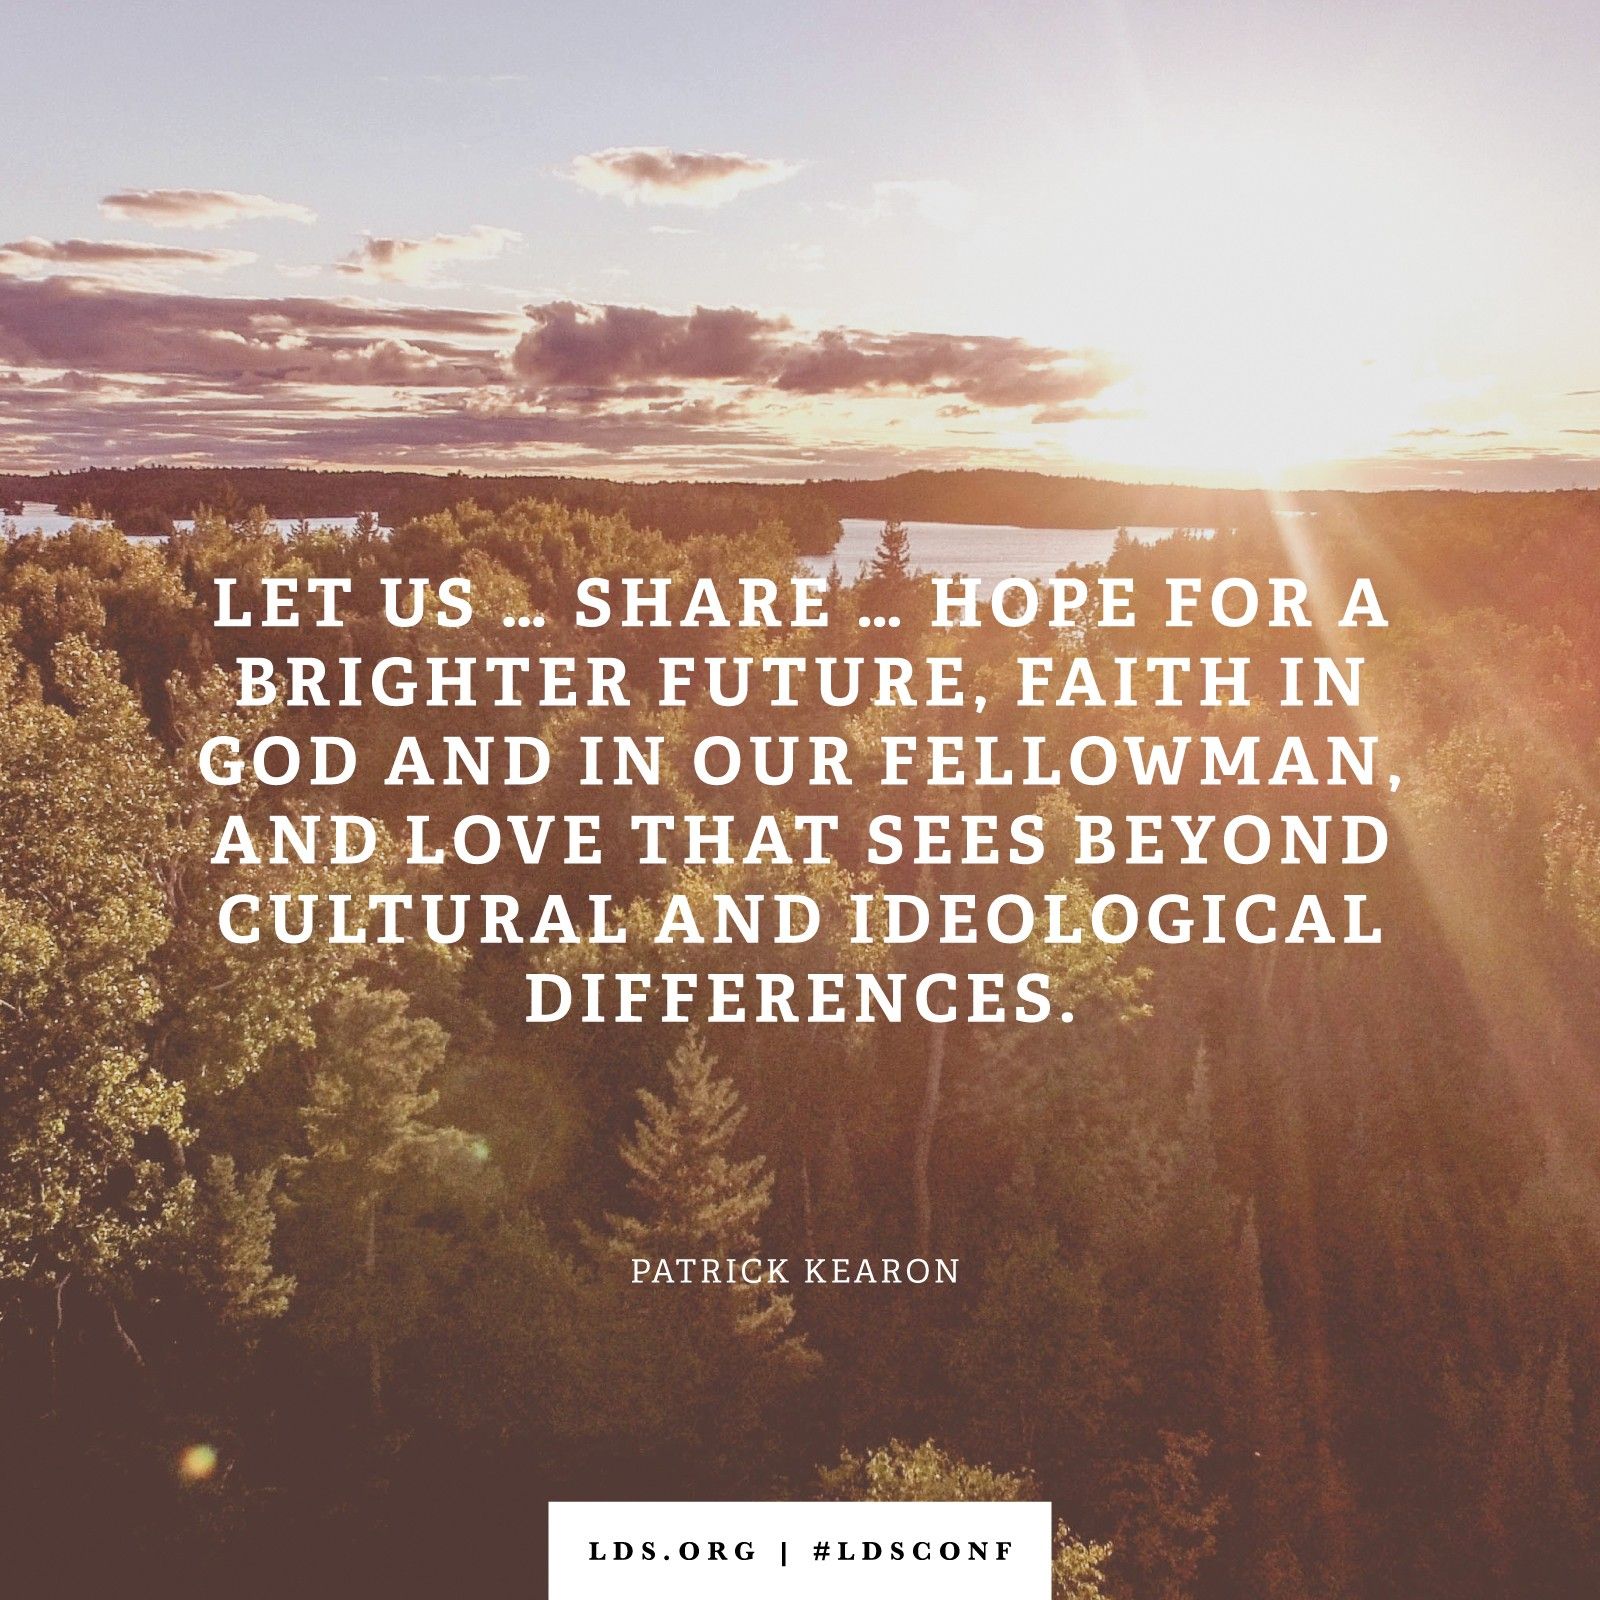 “Let us … share … hope for a brighter future, faith in God and in our fellowman, and love that sees beyond cultural and ideological differences.” —Elder Patrick Kearon, “Refuge from the Storm”